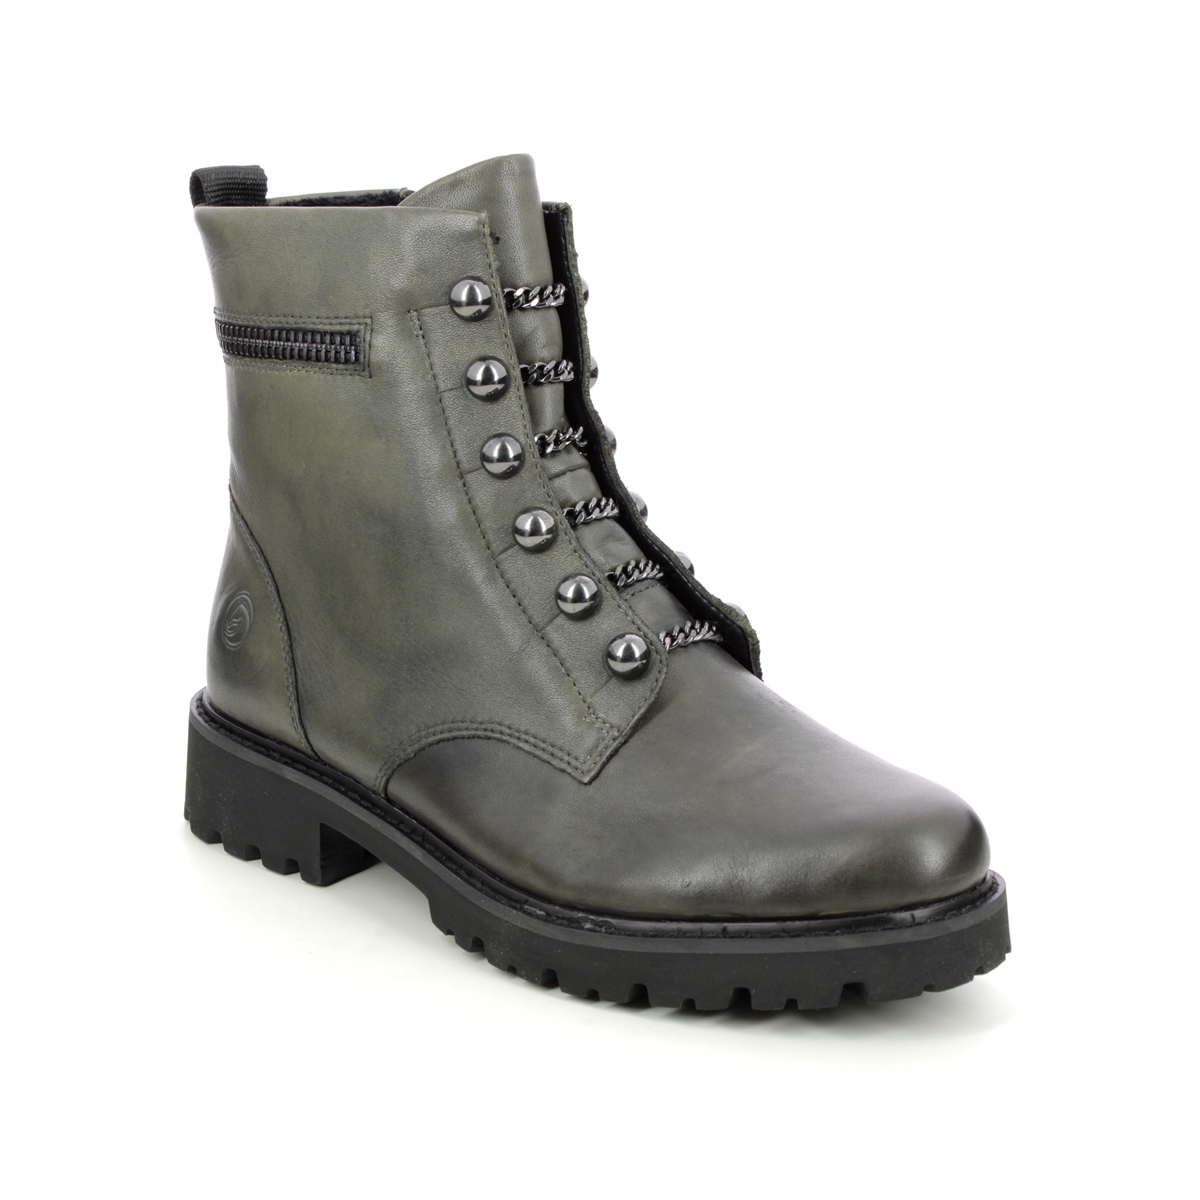 Remonte Docland Olive Leather Womens Biker Boots D8670-52 In Size 39 In Plain Olive Leather